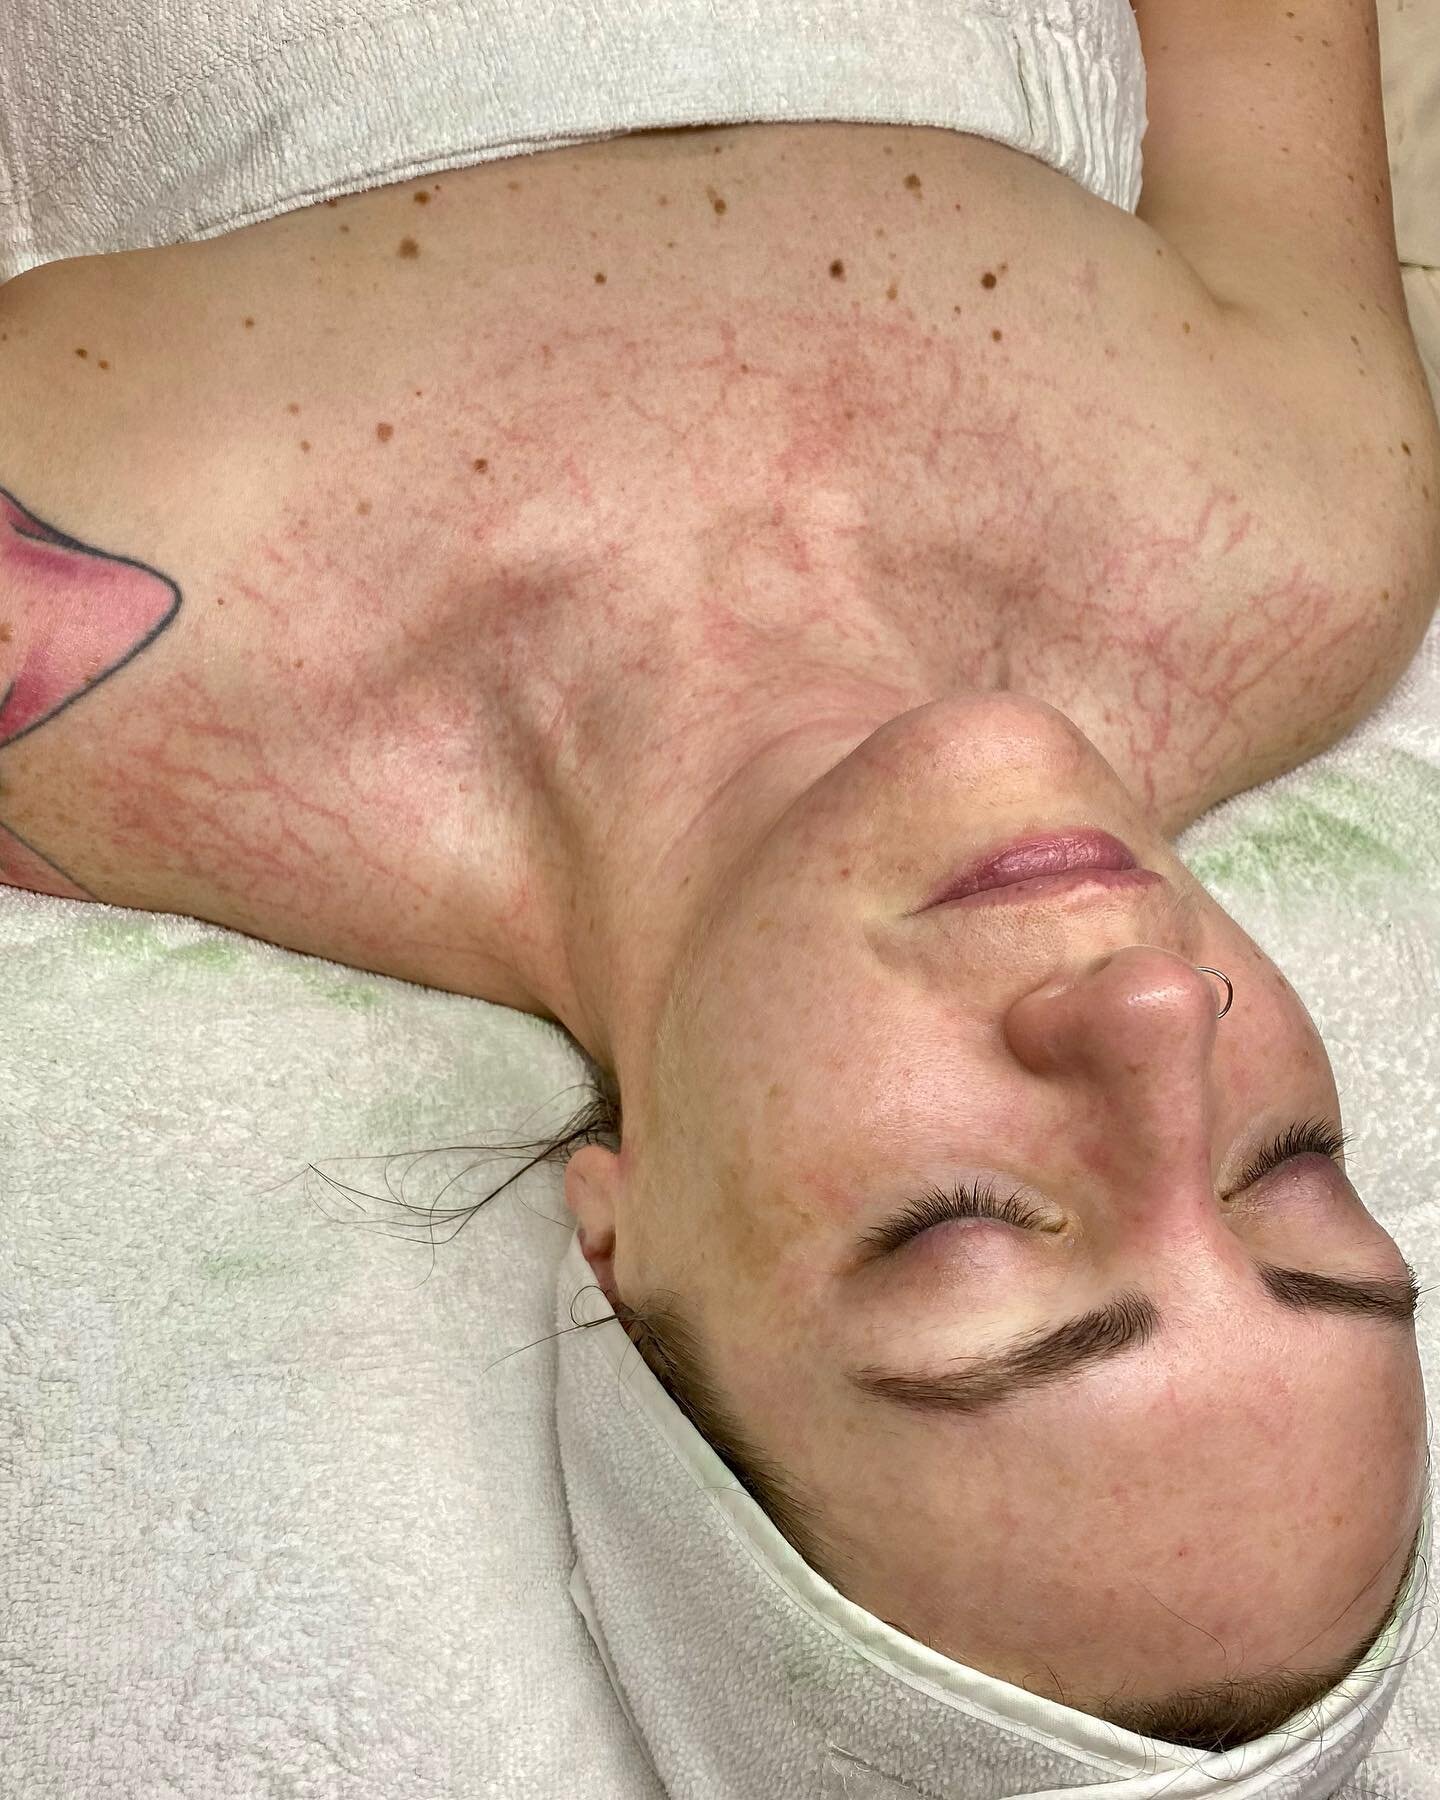 Love a good Plasmatic Effect 🤩

The Plasmatic Effect is a visible sign, indicating dilation of peripheral capillaries, lymph drainage and a rush of fresh oxygenated blood from within the skin into the capillaries- improving the overall health of the